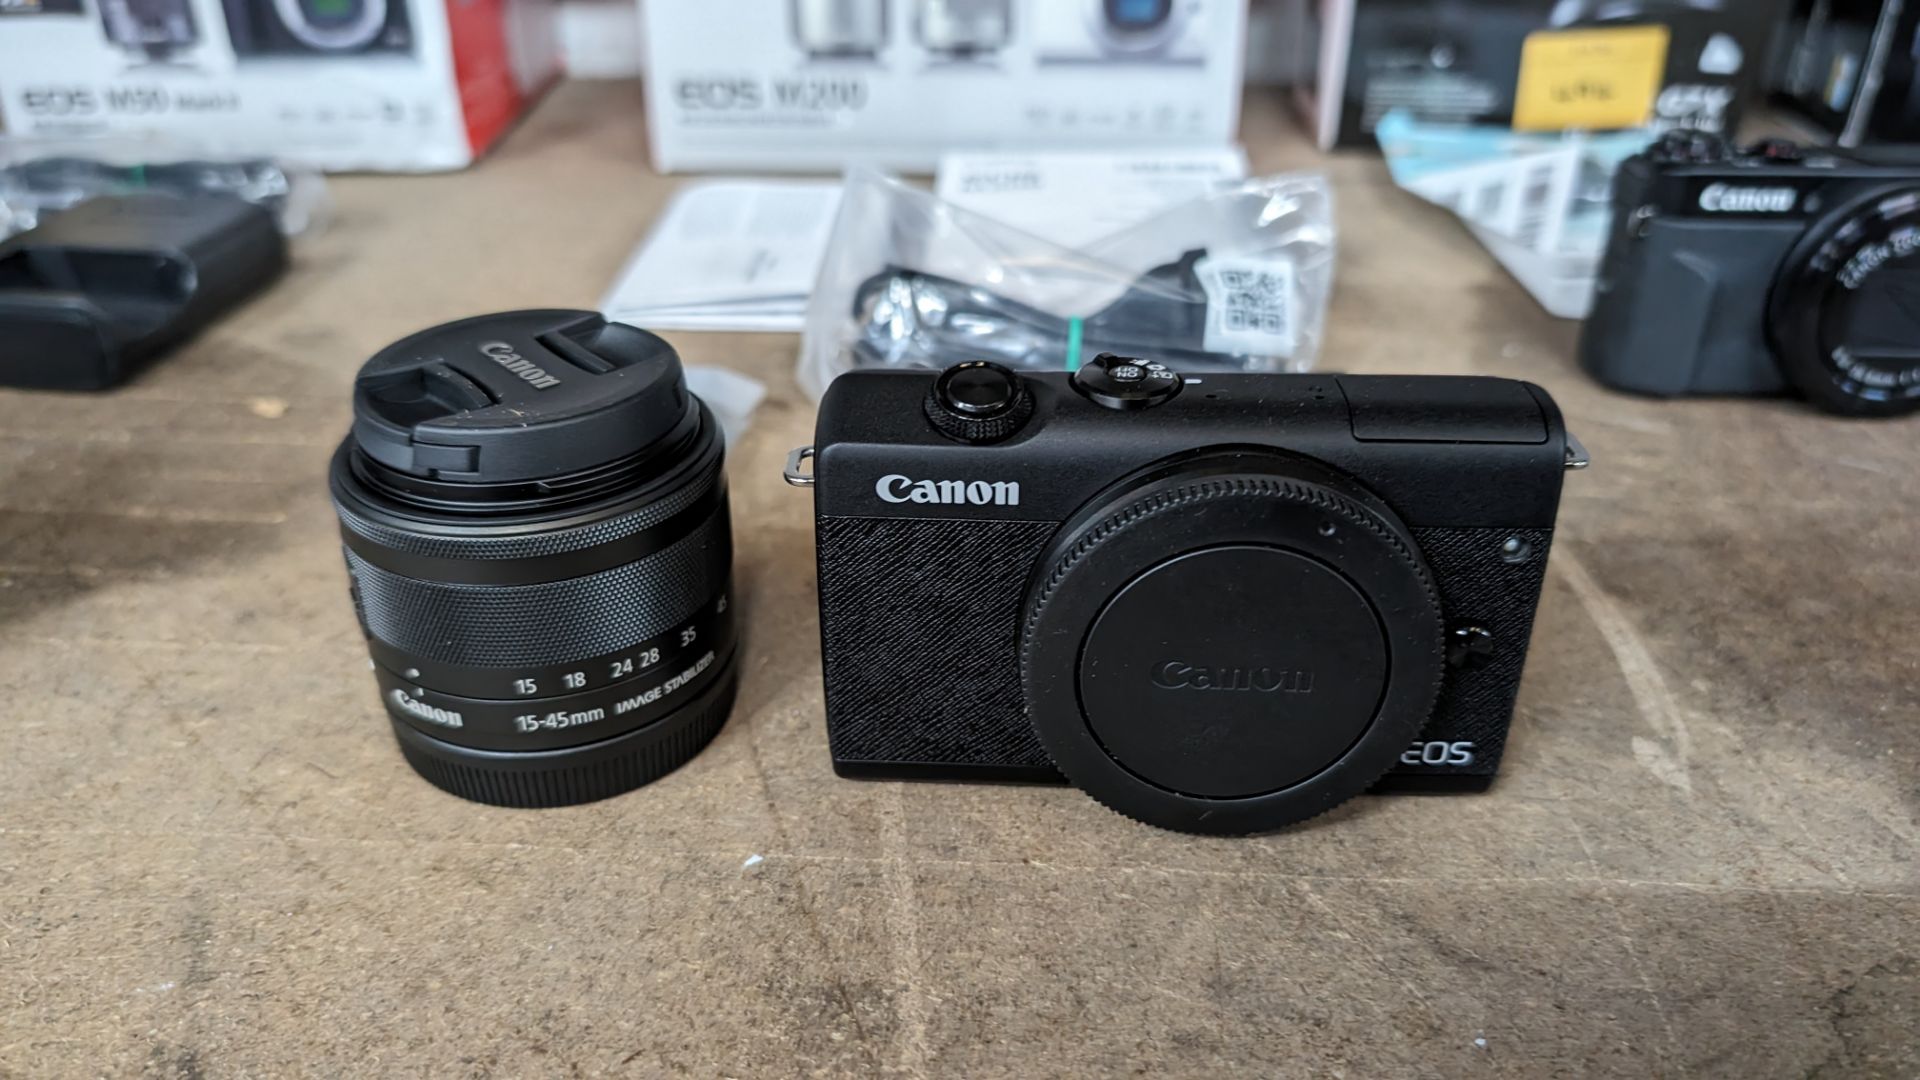 Canon EOS M200 camera kit, including 15-45mm image stabilizer lens, plus battery and charger - Bild 3 aus 12